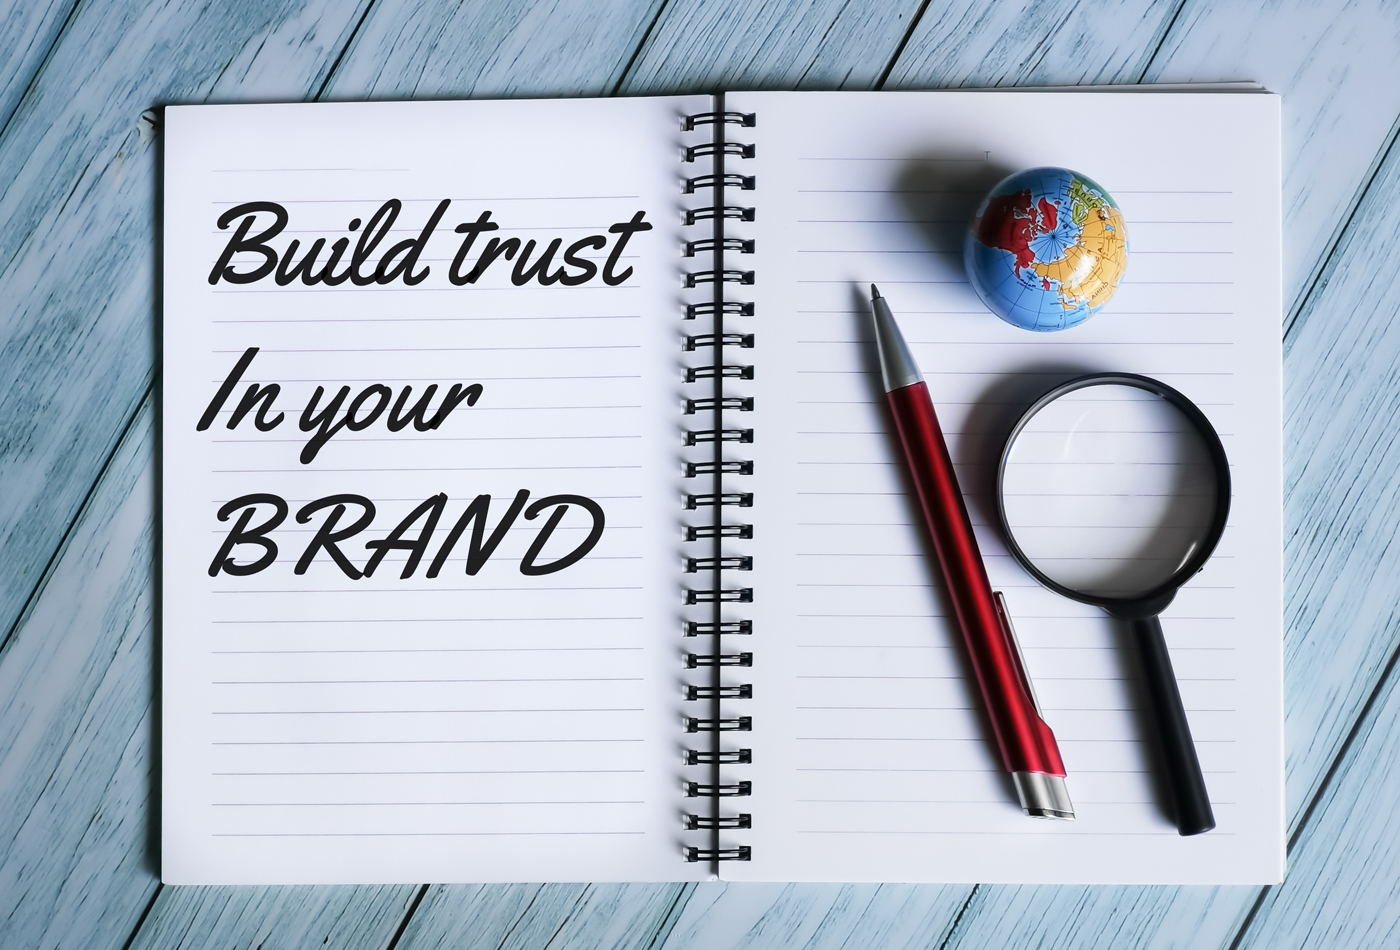 Why Brand Building is Important Before Sales